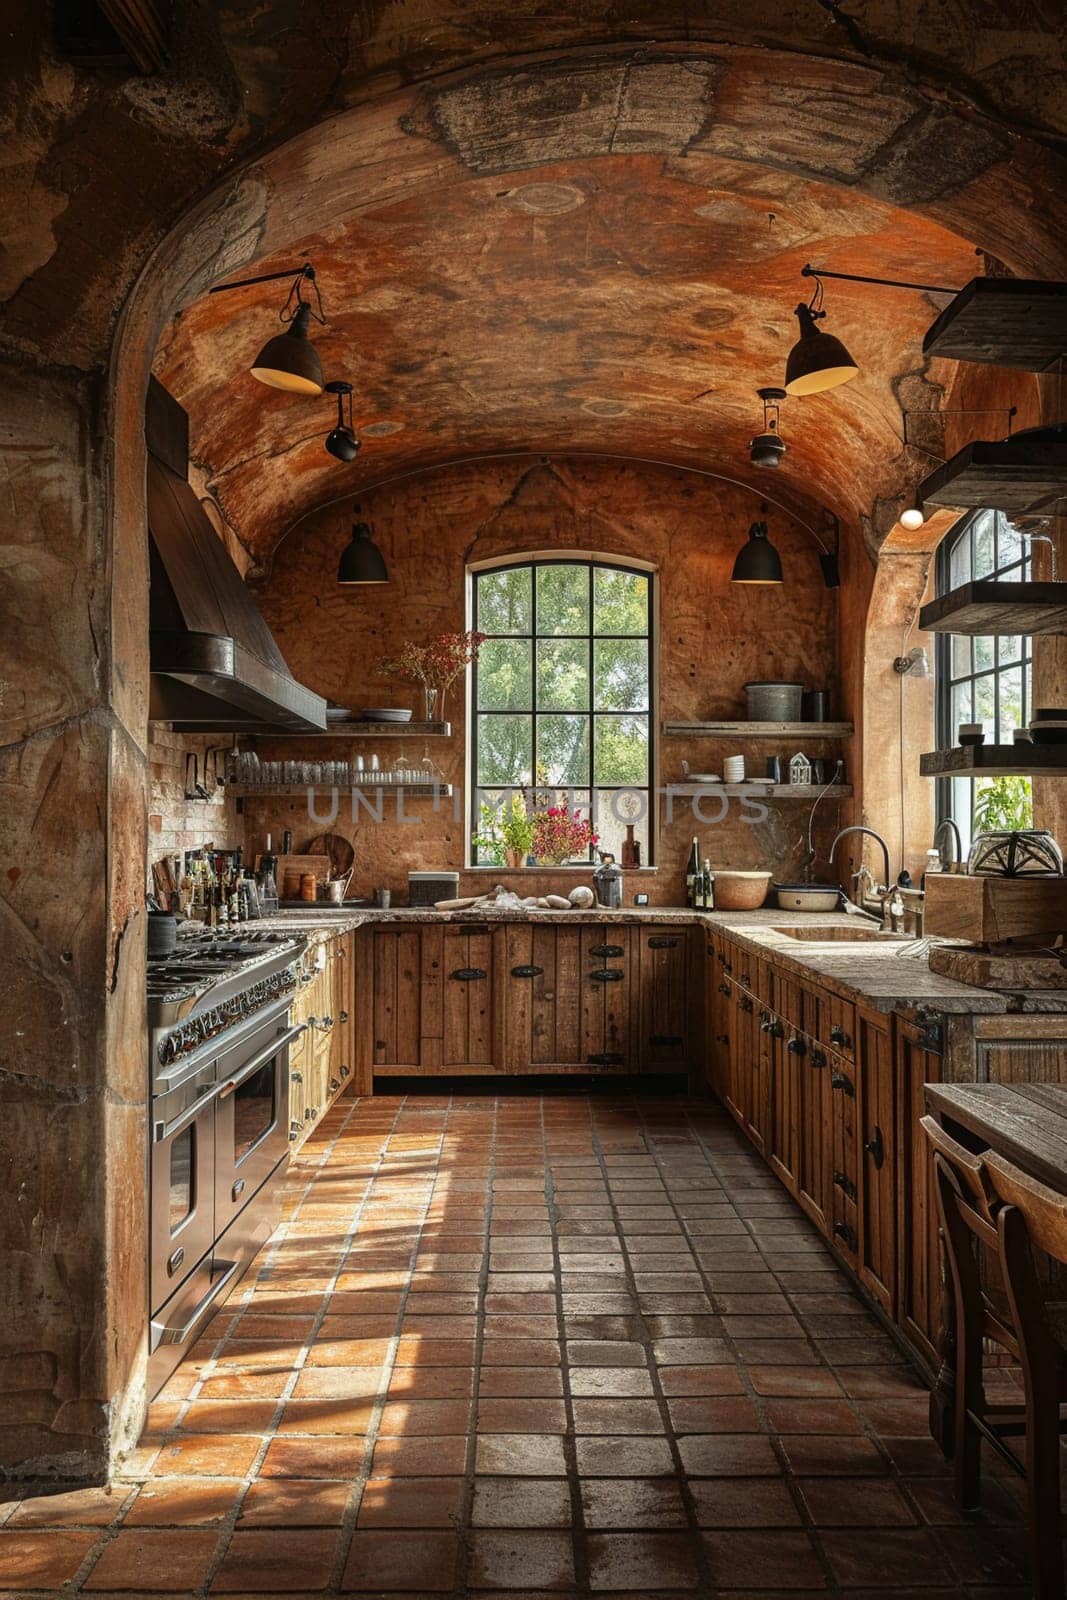 Italian villa kitchen with terracotta tiles and a rustic stone ovenHyperrealistic